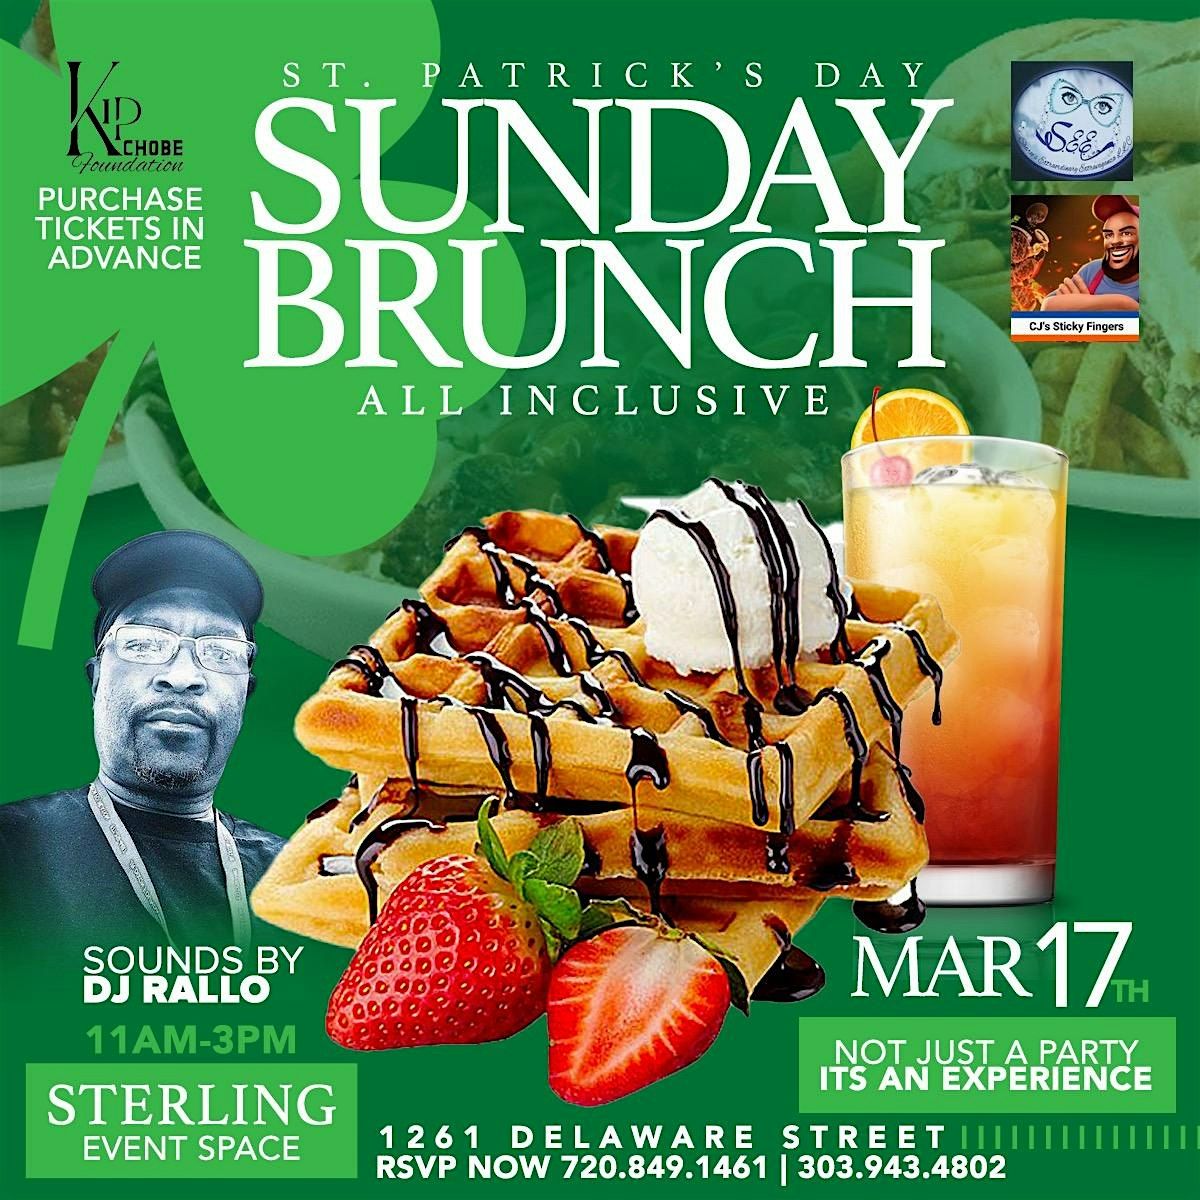 ST PATRICK DAY ALL INCLUSIVE R&B BRUNCH